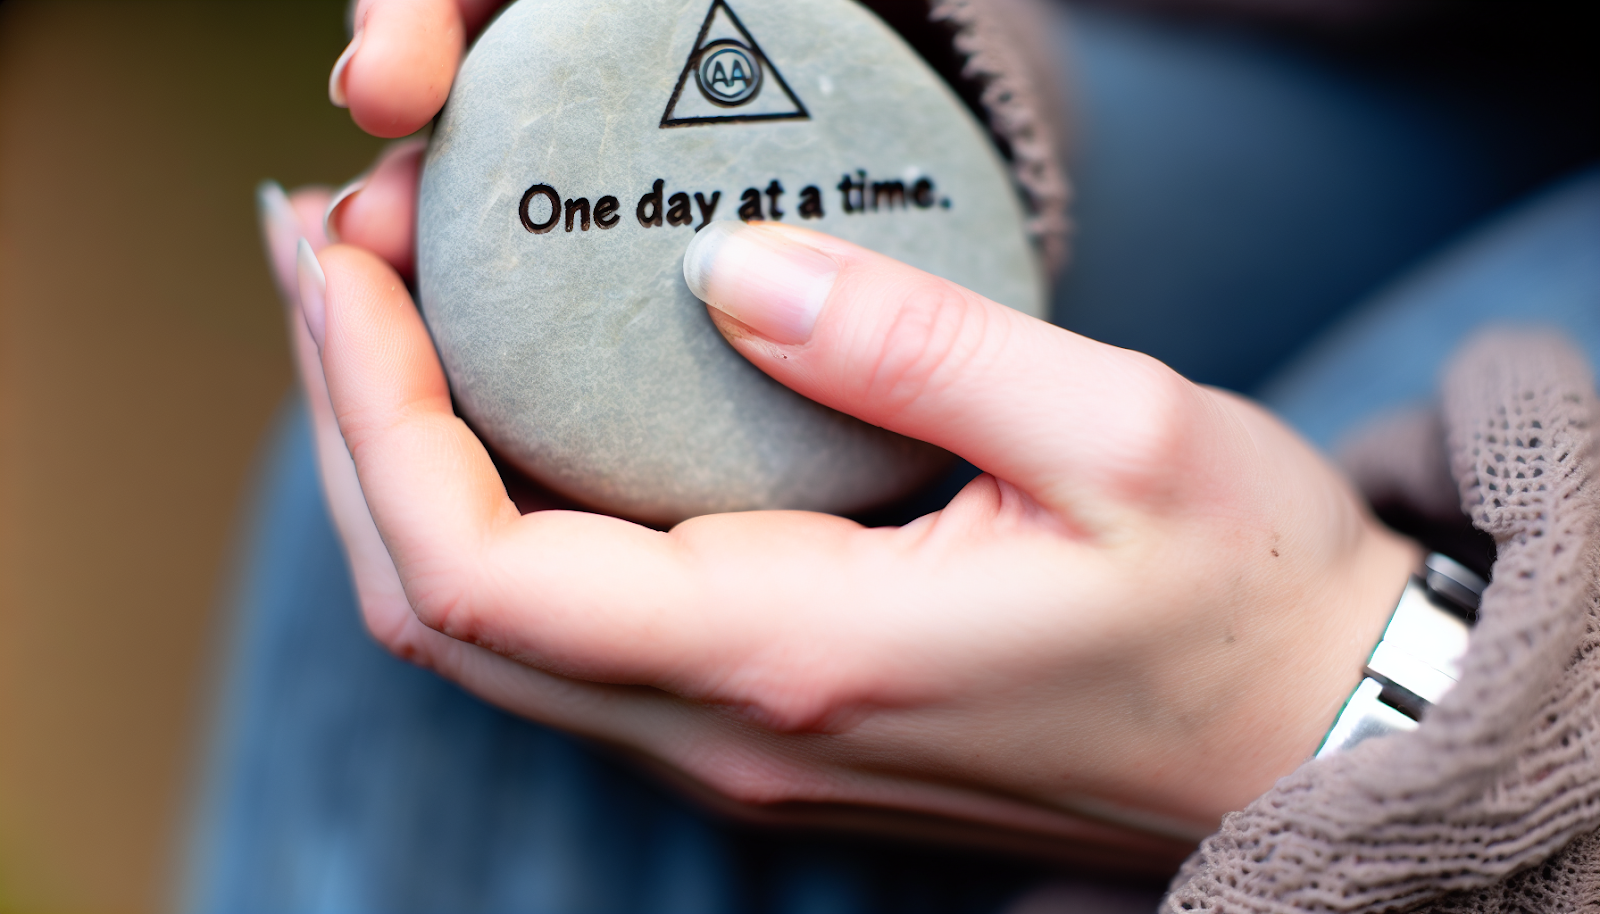 A hand holding a stone with the AA slogan 'One day at a time' engraved on it